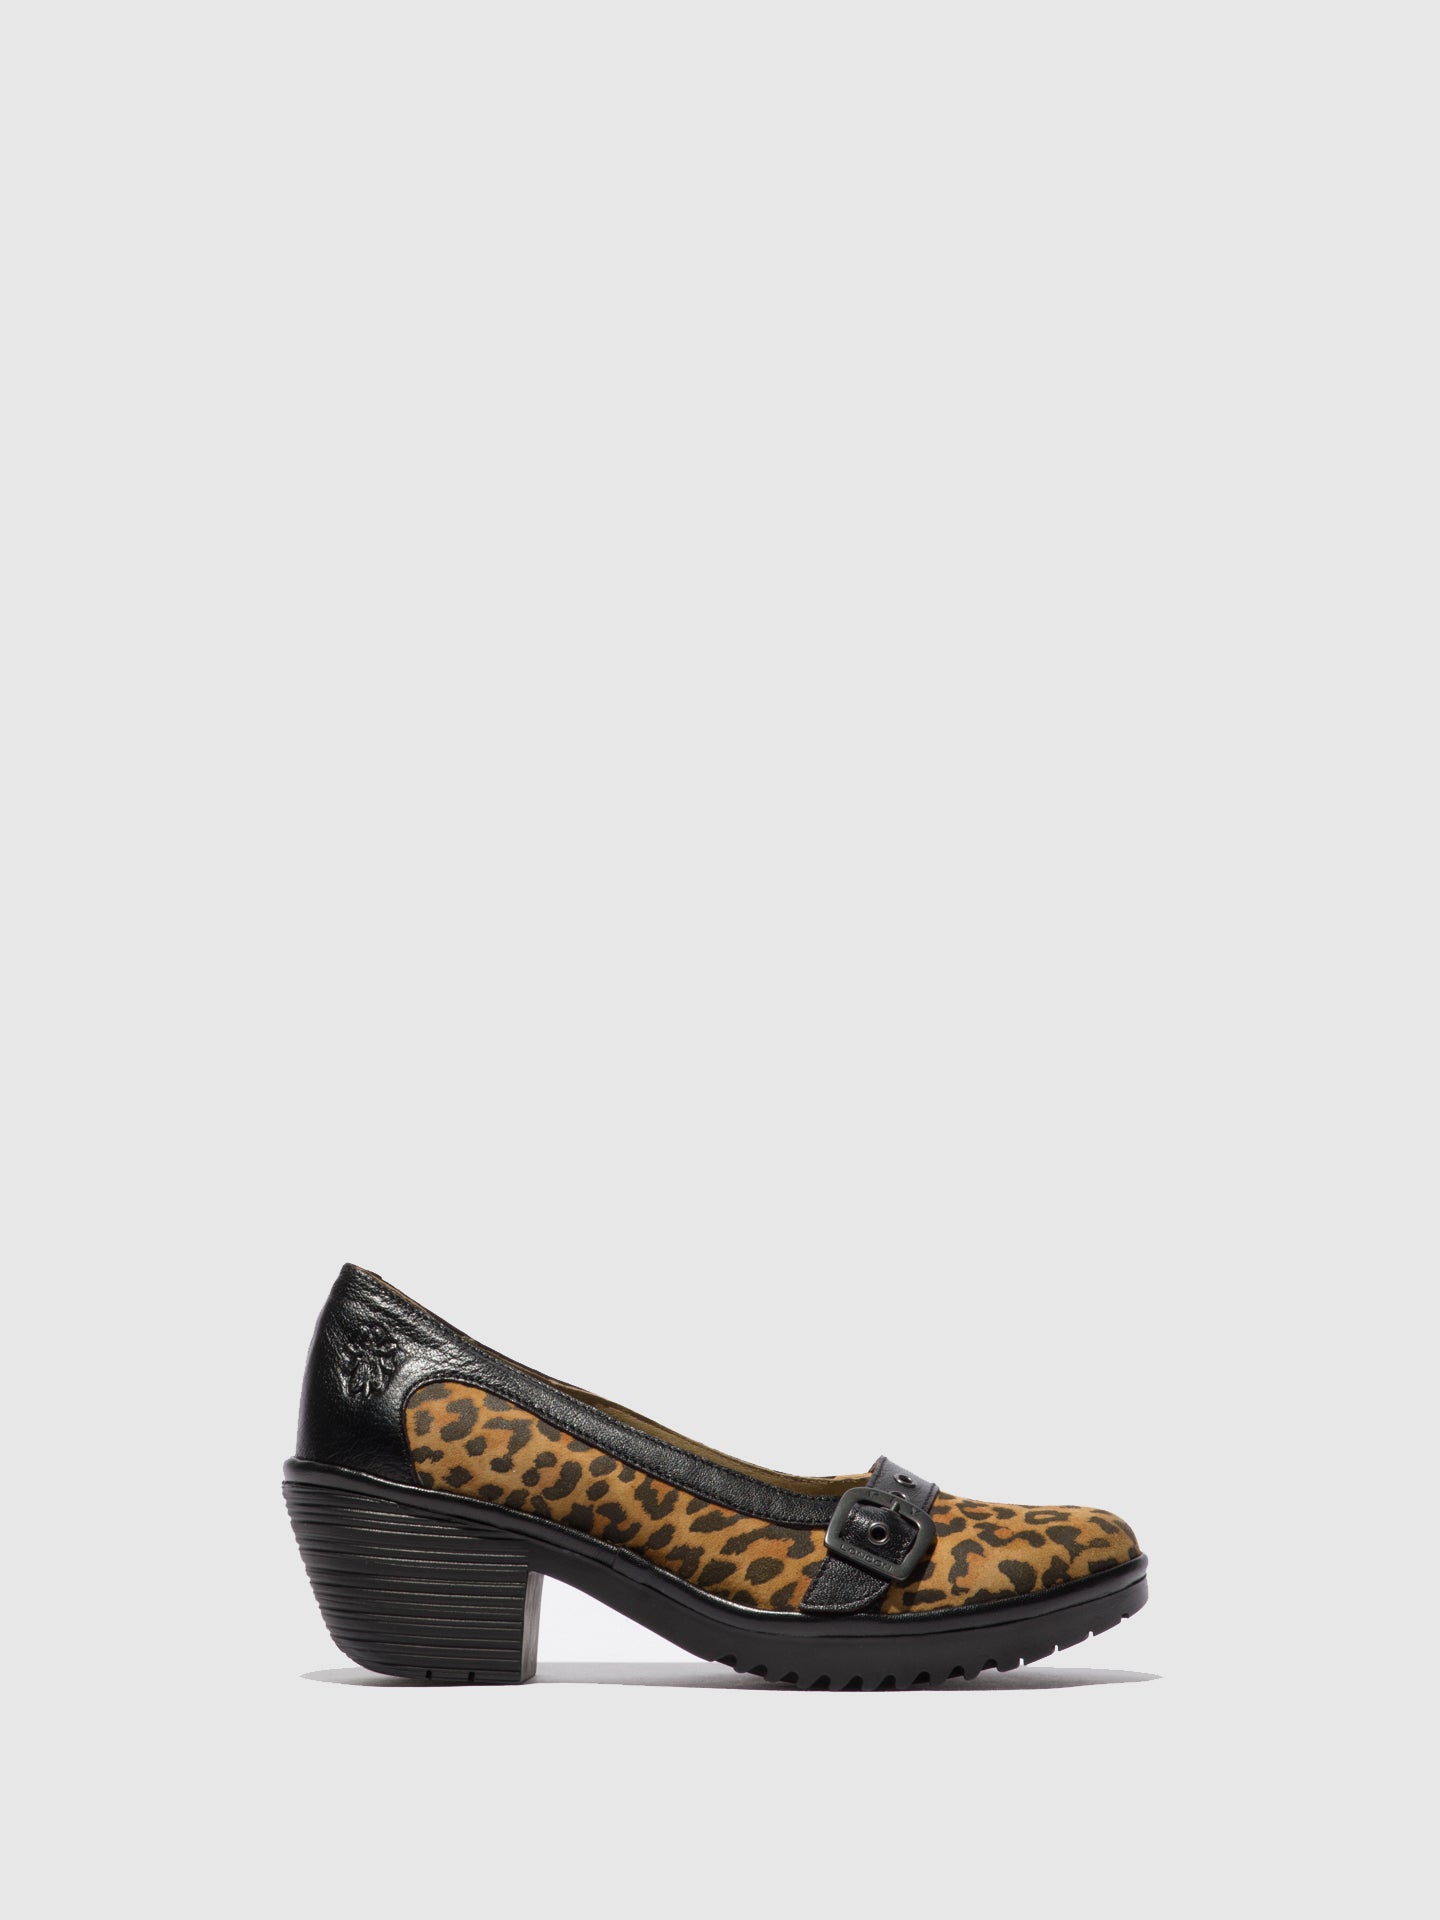 Fly London Sapatos Slip-on WASB343FLY CHEETAH/MOUSSE TAN/BLACK